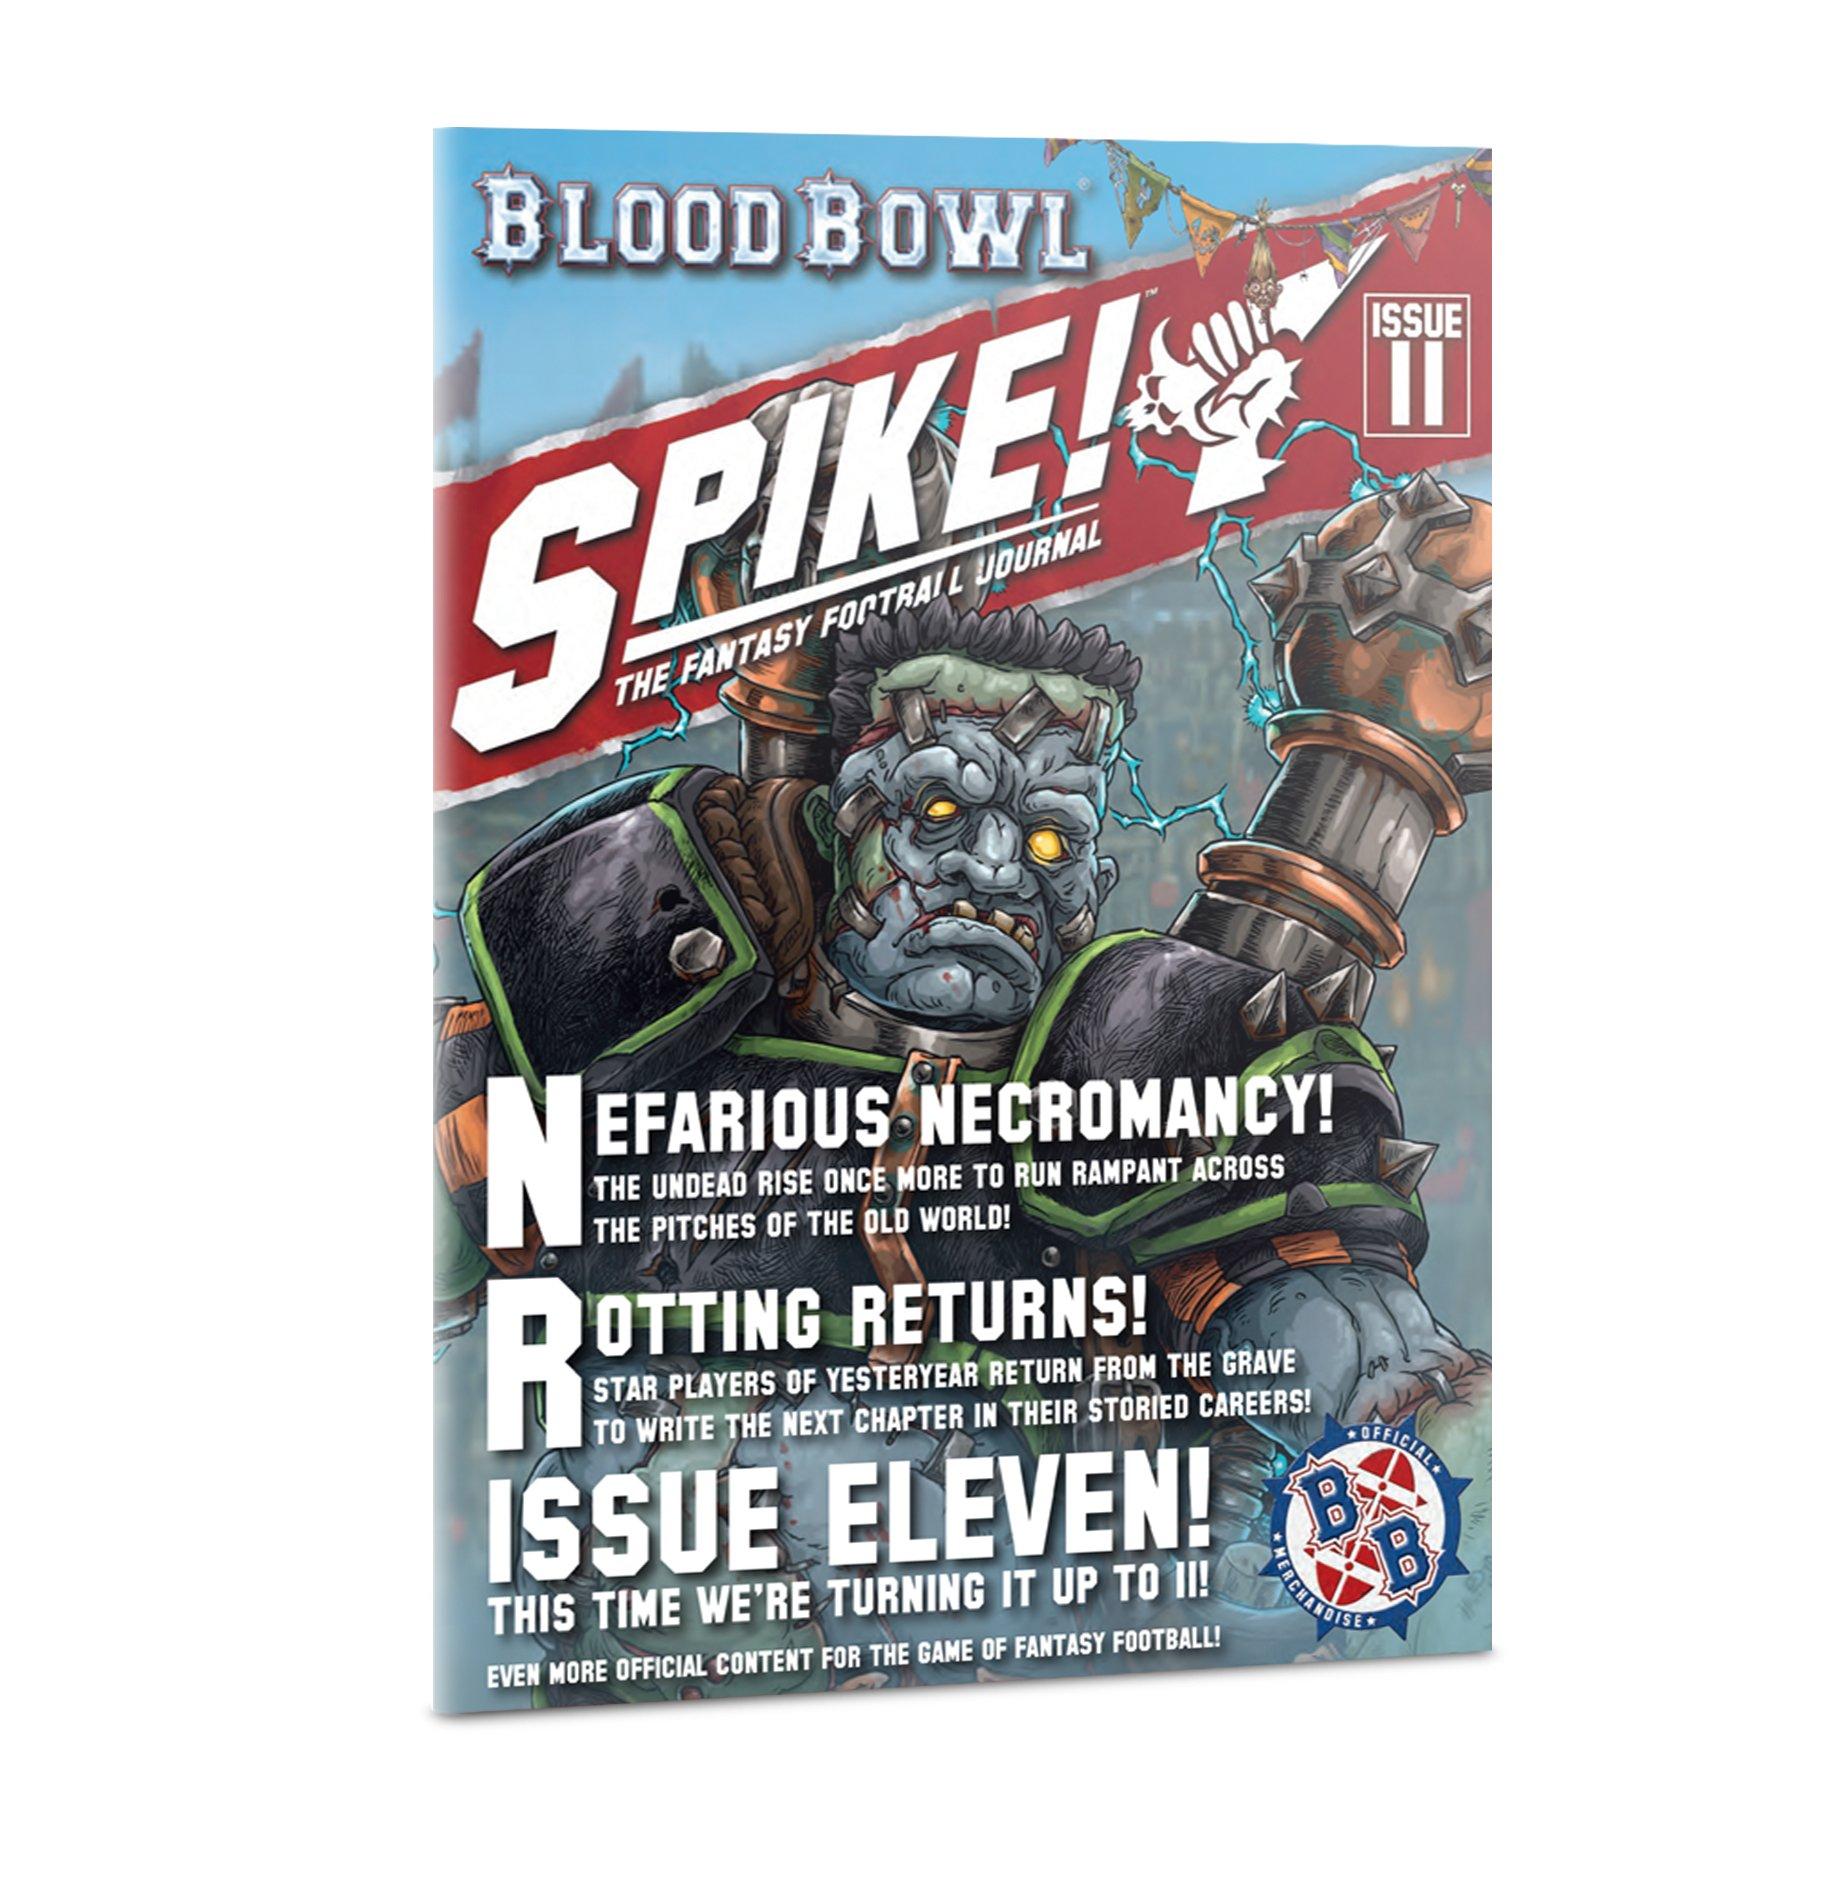 Blood Bowl - Spike! Issue 11